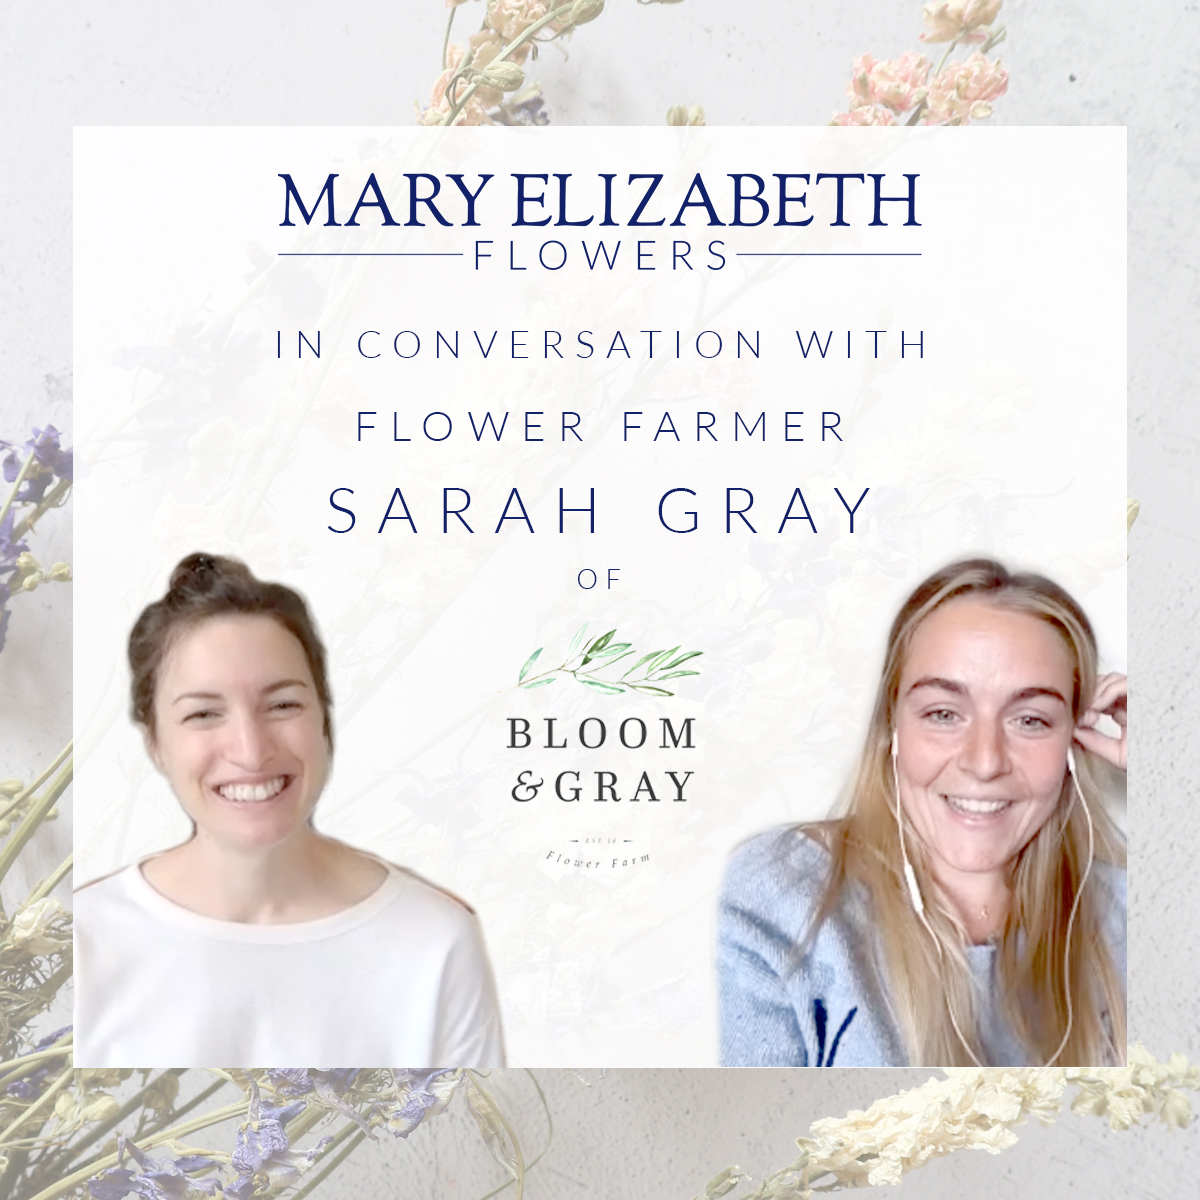 Mary Elizabeth Flowers In Conversation with Sarah Gray of Bloom and Gray Flower Farm